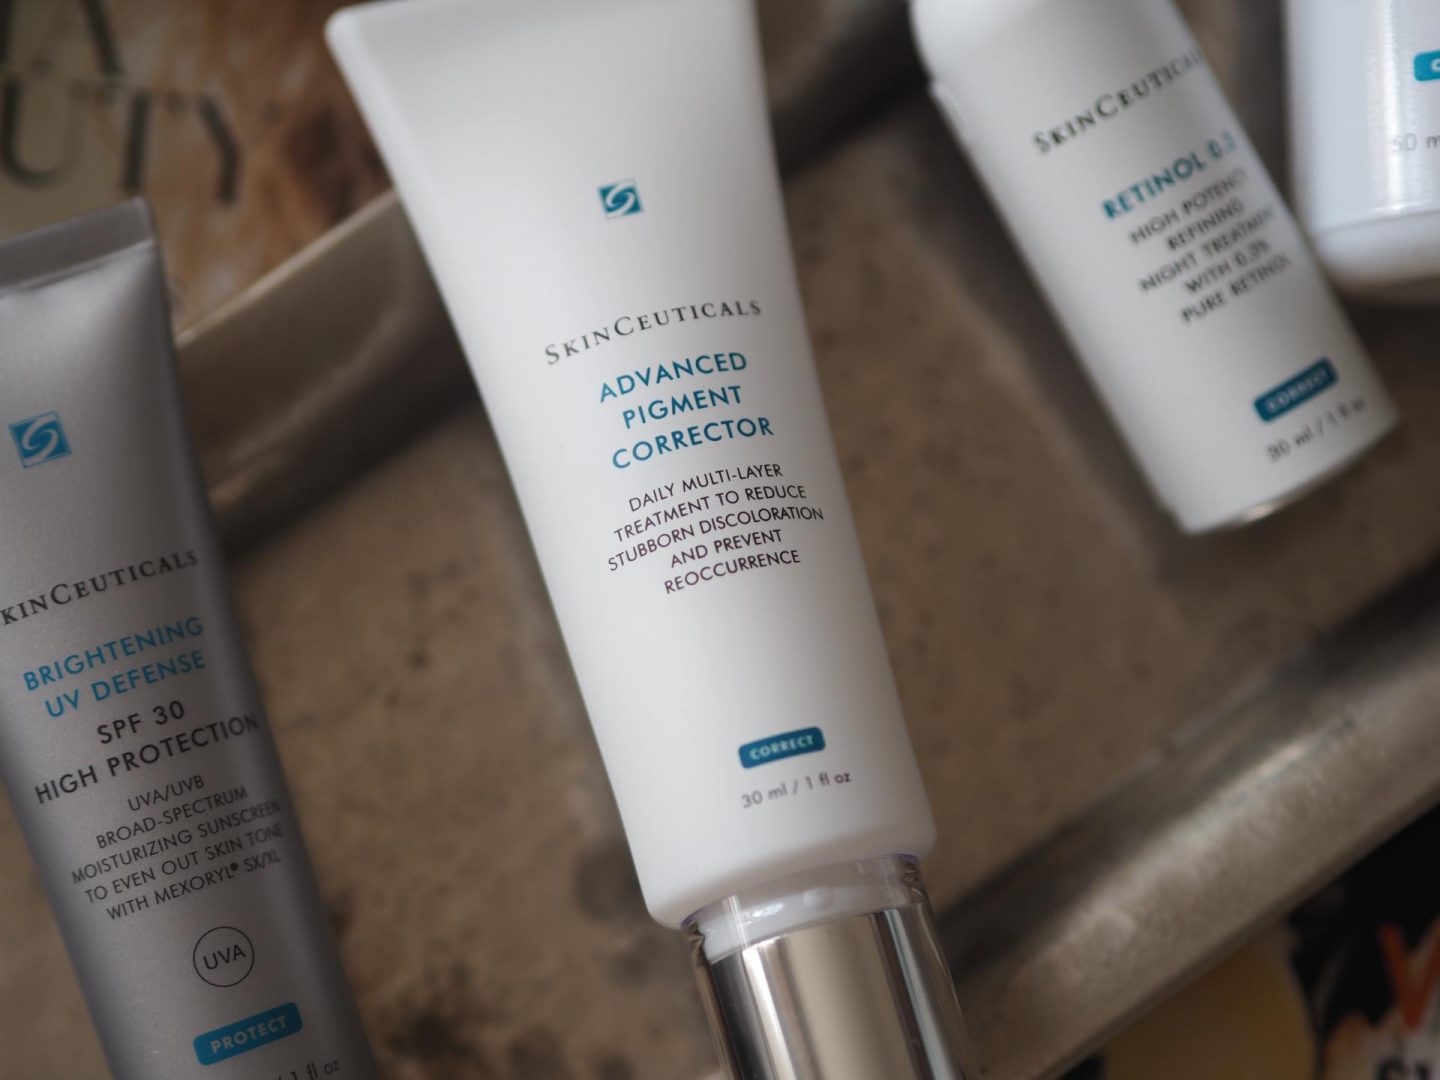 Skincare Products to Target Melasma - Product: SkinCeuticals Advanced Pigment Corrector